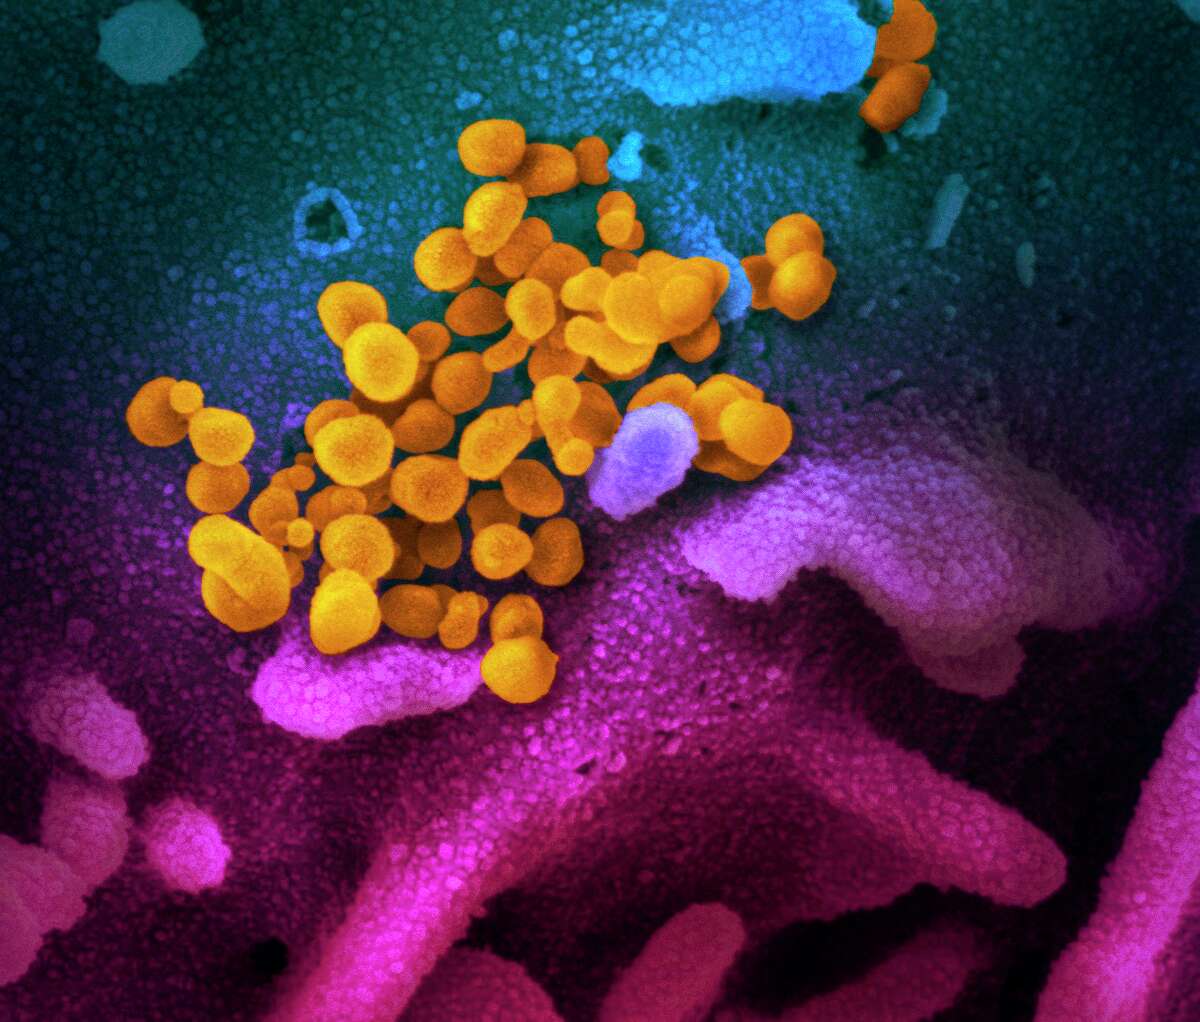 This file photo handout illustration image obtained recently courtesy of the National Institutes of Health taken with a scanning electron microscope shows SARS-CoV-2 (yellow)also known as 2019-nCoV, the virus that causes the disease COVID-19 isolated from a patient in the U.S., emerging from the surface of cells (blue/pink) cultured in the lab. Faulty test kits for the novel coronavirus coupled with a diagnostic strategy that initially targeted too few people allowed the disease to spread beyond U.S. authorities' ability to detect it, health experts have said. Writing in the Journal of the American Medical Association (JAMA) recently, epidemiologists from Johns Hopkins University and Stanford University said the failings had contributed to the virus taking root in communities across the country. Connecticut state Representative, Lucy Dathan, whose district represents parts of New Canaan has just the information about COVID-19, that residents of the town may need to deal with its crisis.